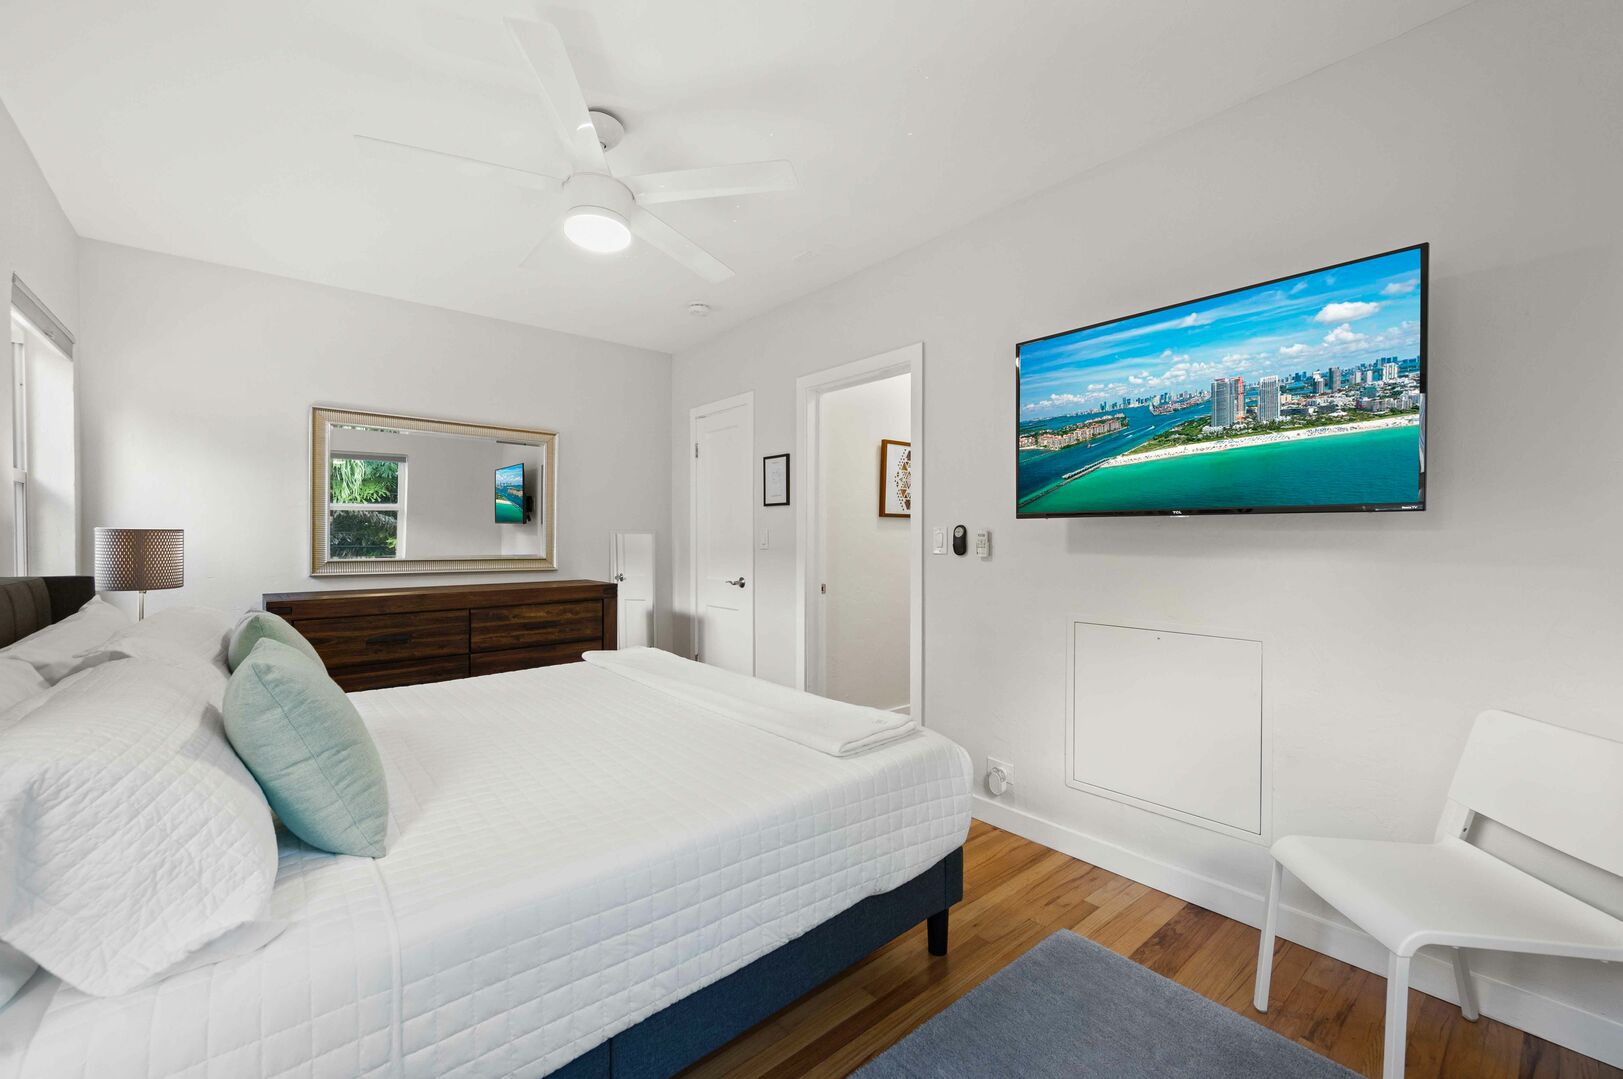 The spacious bedroom offers plenty of daylight, a king size bed and a smart TV.